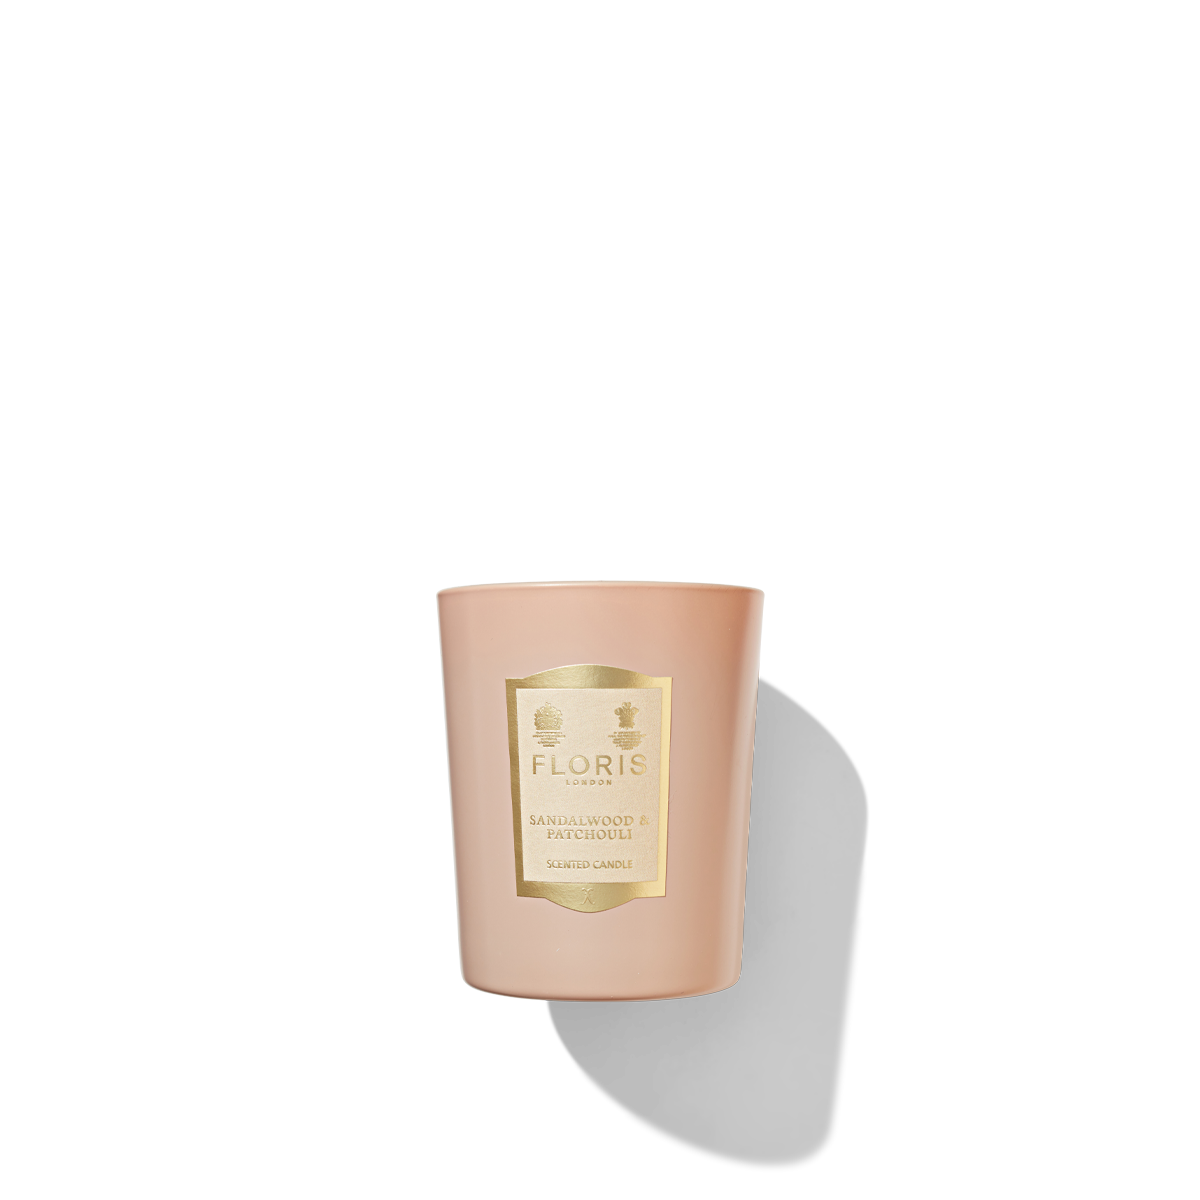 A light pink candle jar with a  light pink and gold label reading 'Floris London sandalwood and patchouli scented candle'.